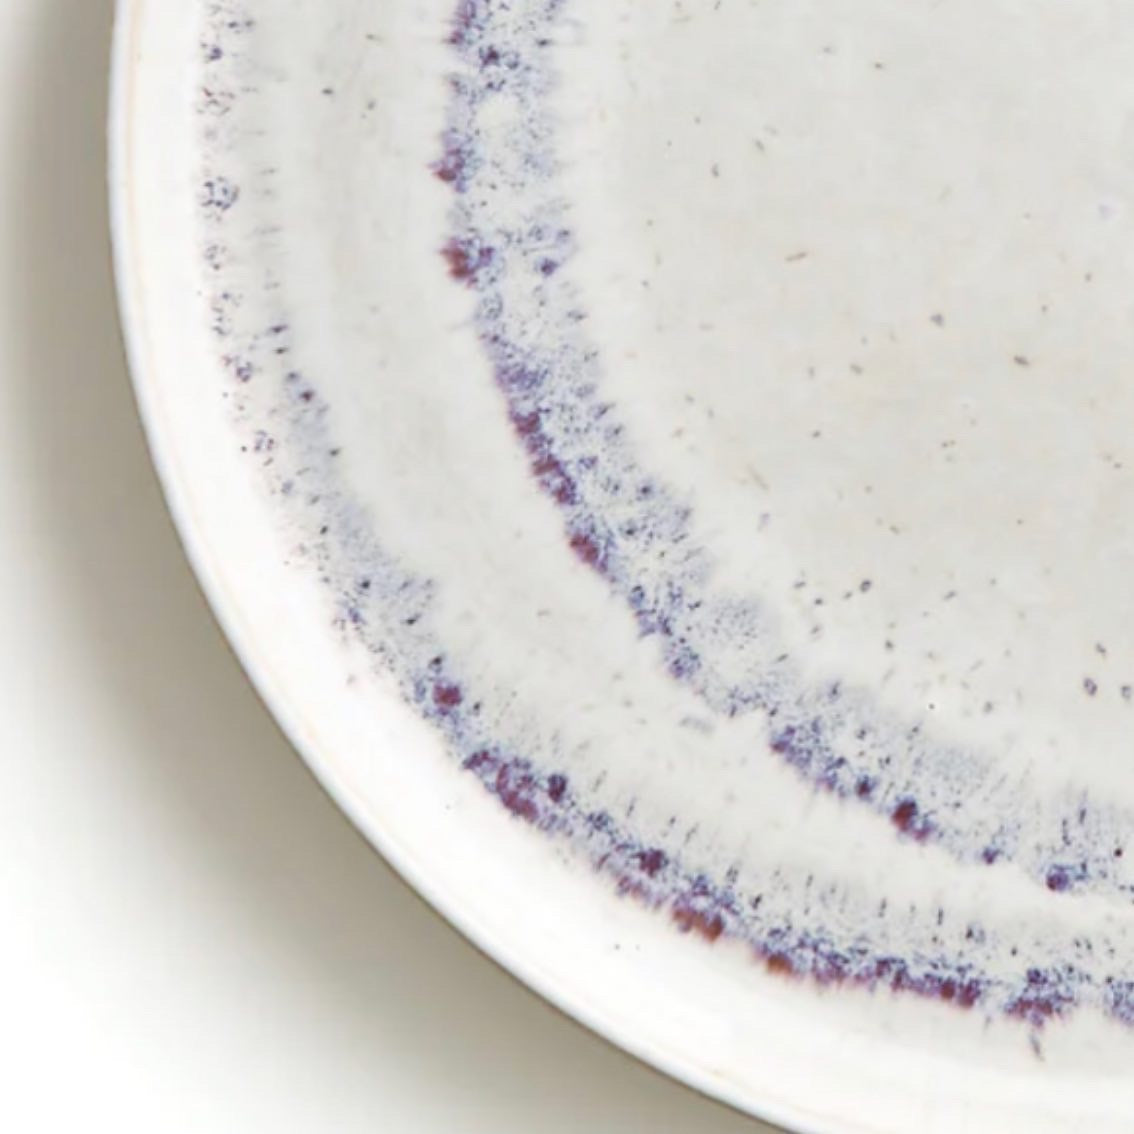 SET OF 4 FLAT PLATES GALAXY by Suuuper